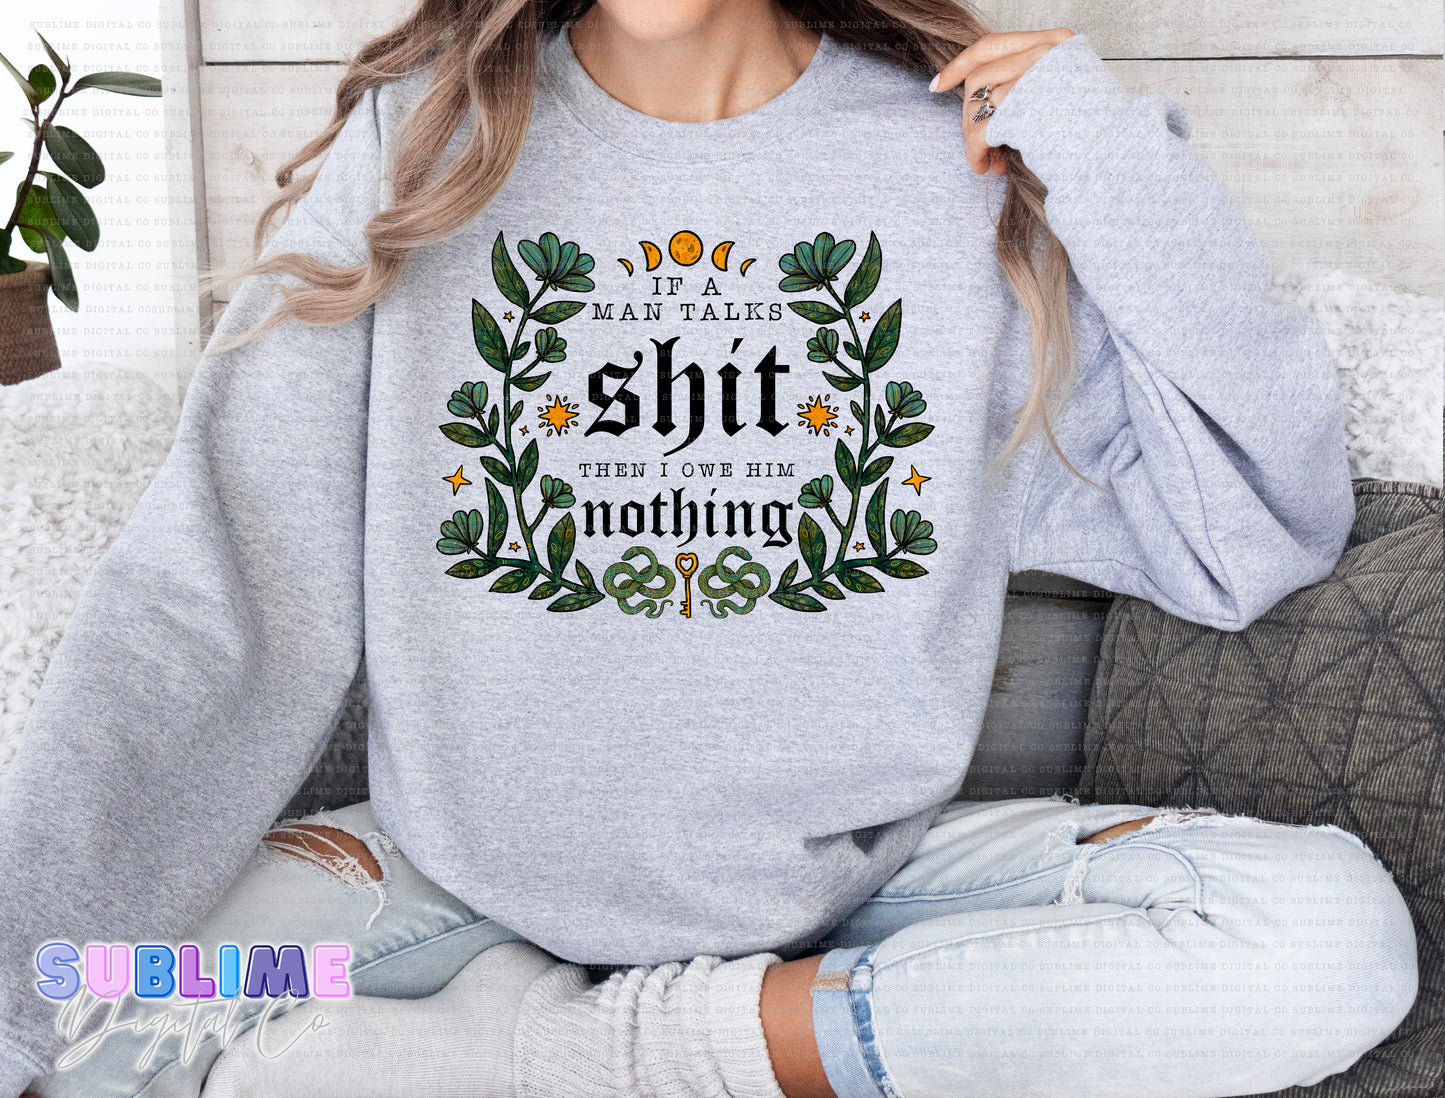 Talks Shit • Adult Apparel • Made to Order • TAT: Up To 21 Days